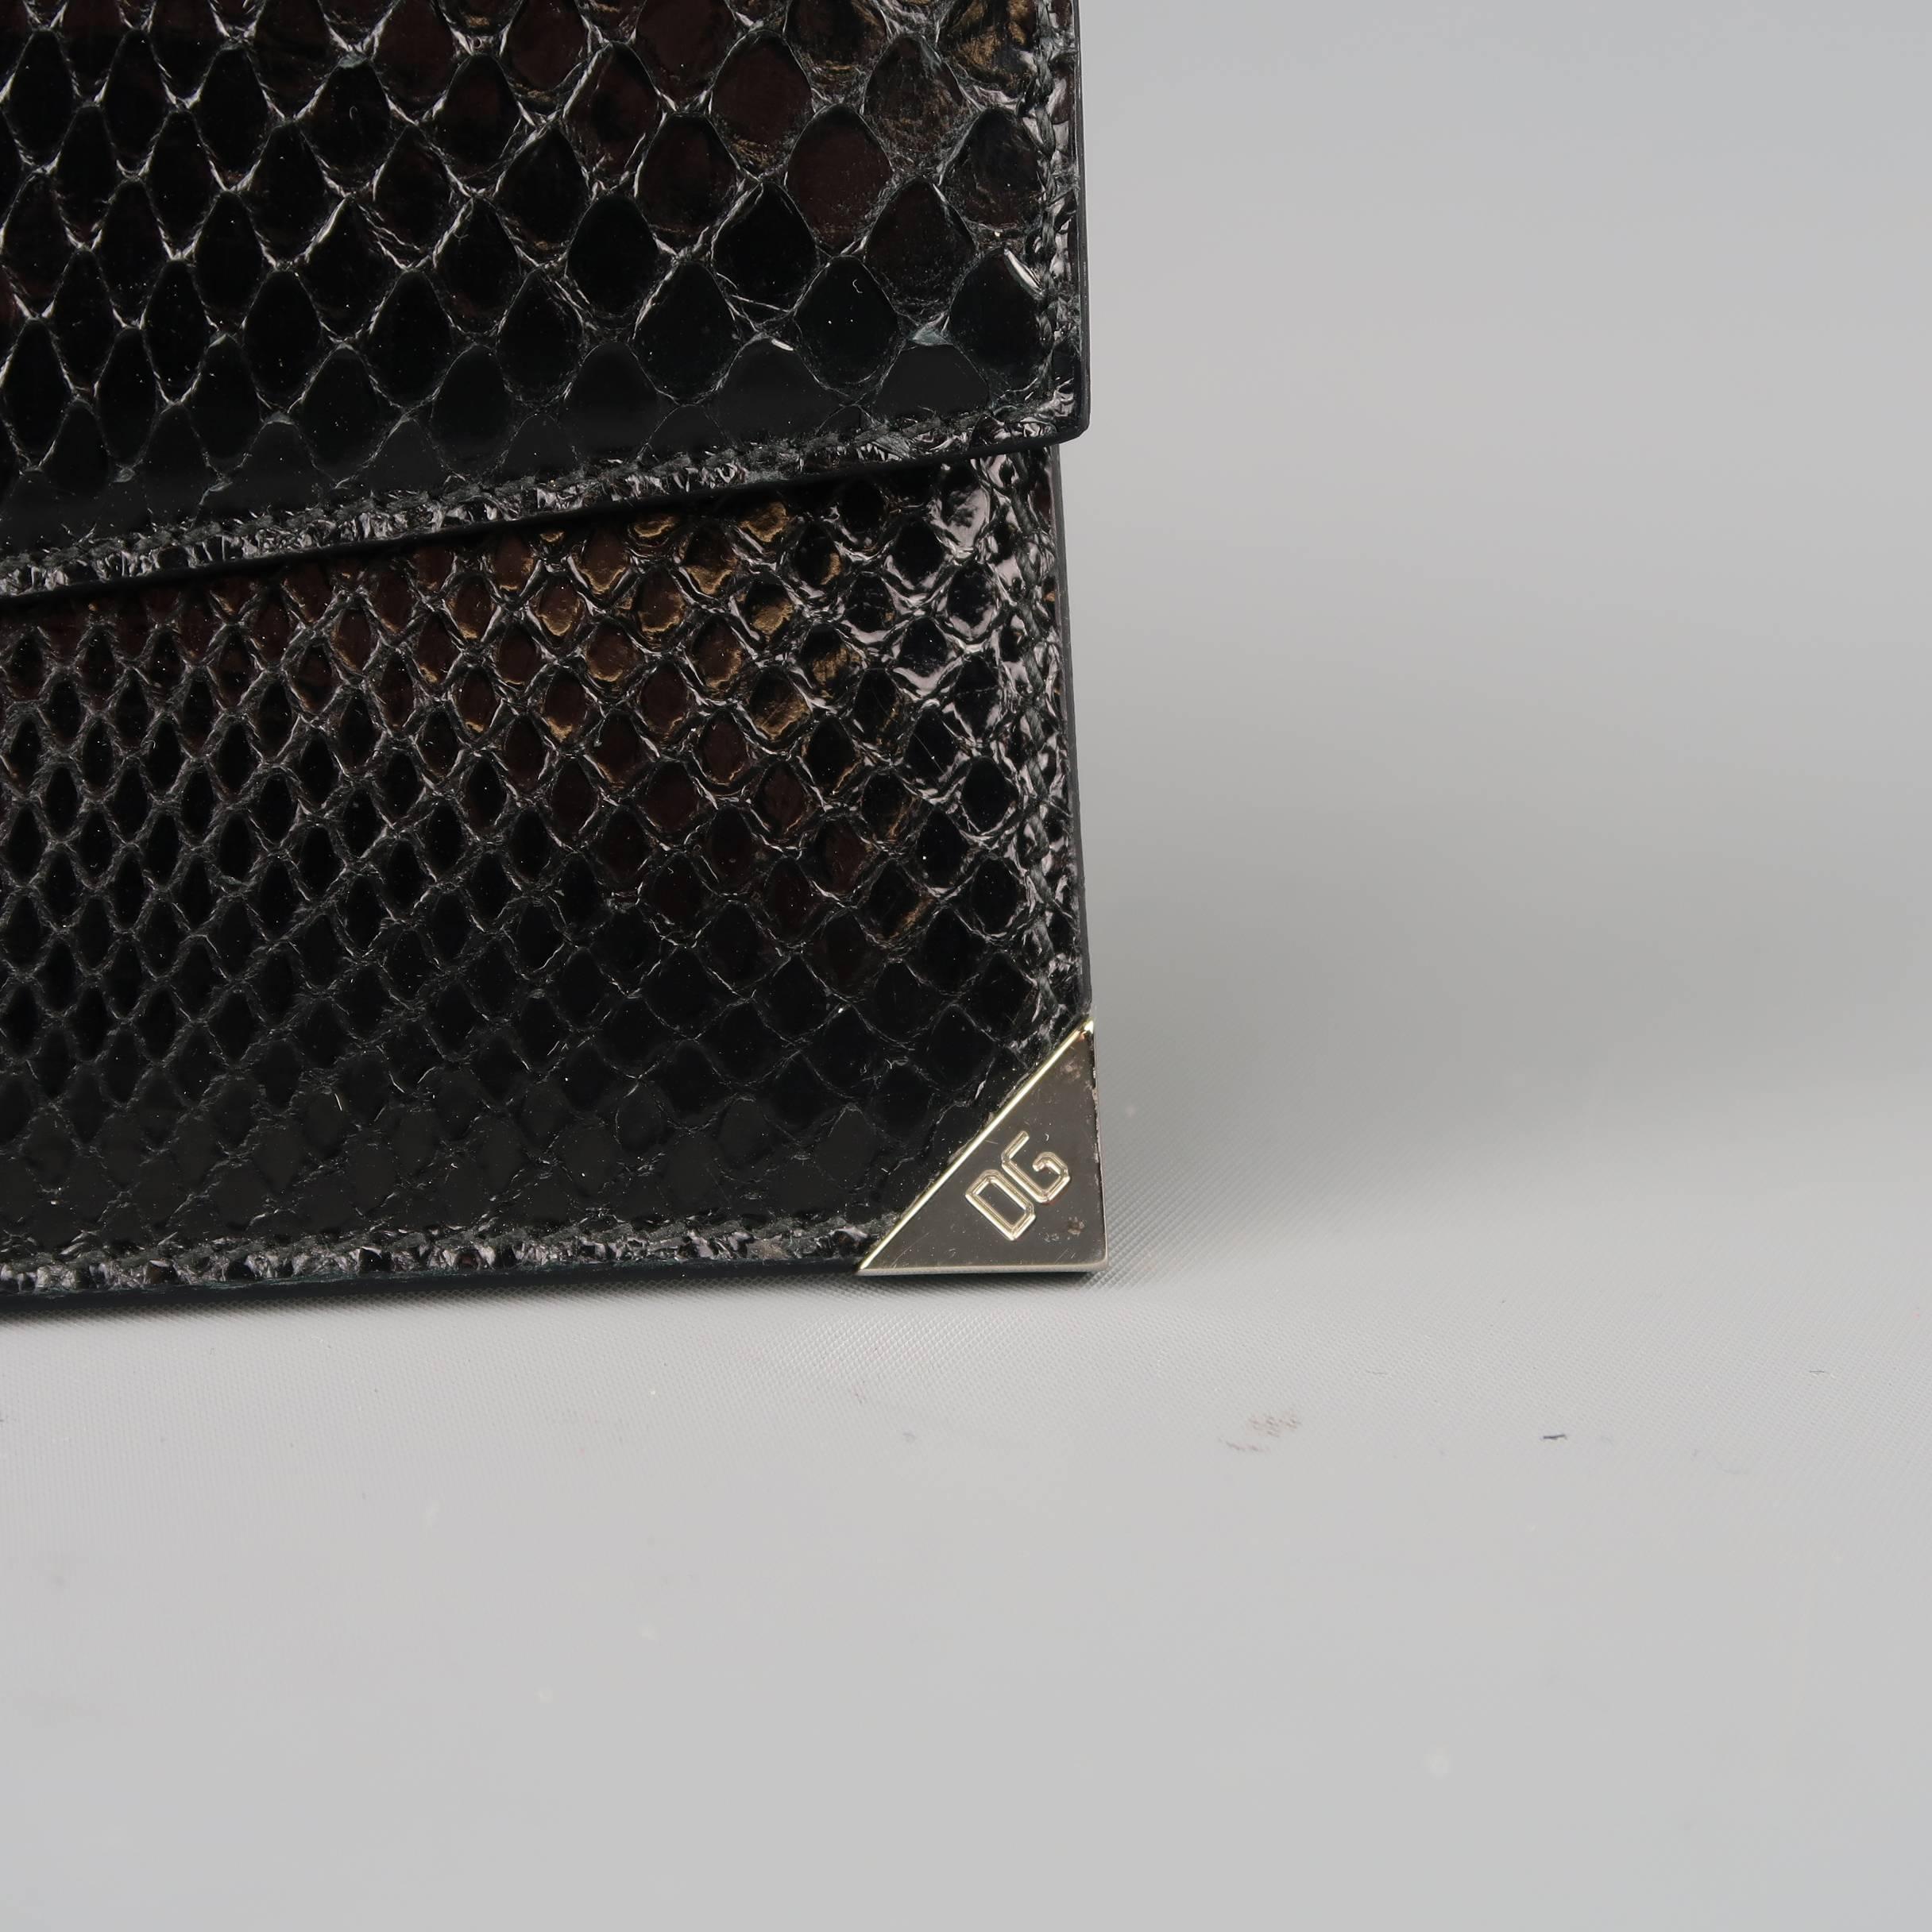 DOLCE & GABBANA wallet comes in black snakeskin leather and features an envelope holder with snap closure and silver tone embossed corner with internal card holder. Made in Italy.
 
New with Tags.
 
5.5 x 3.25 in.
